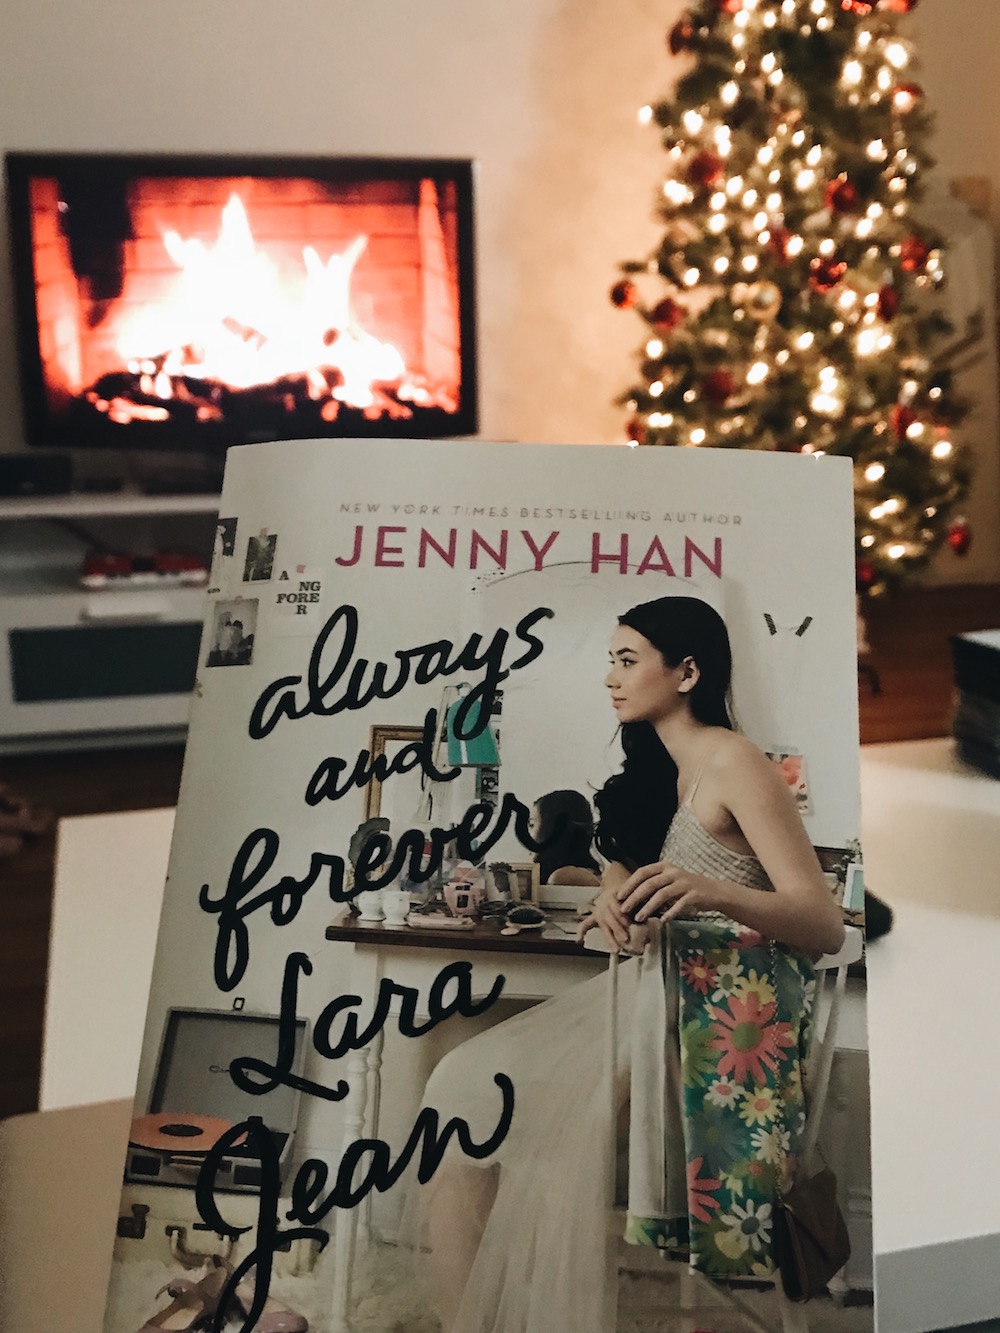 always and forever lara jean